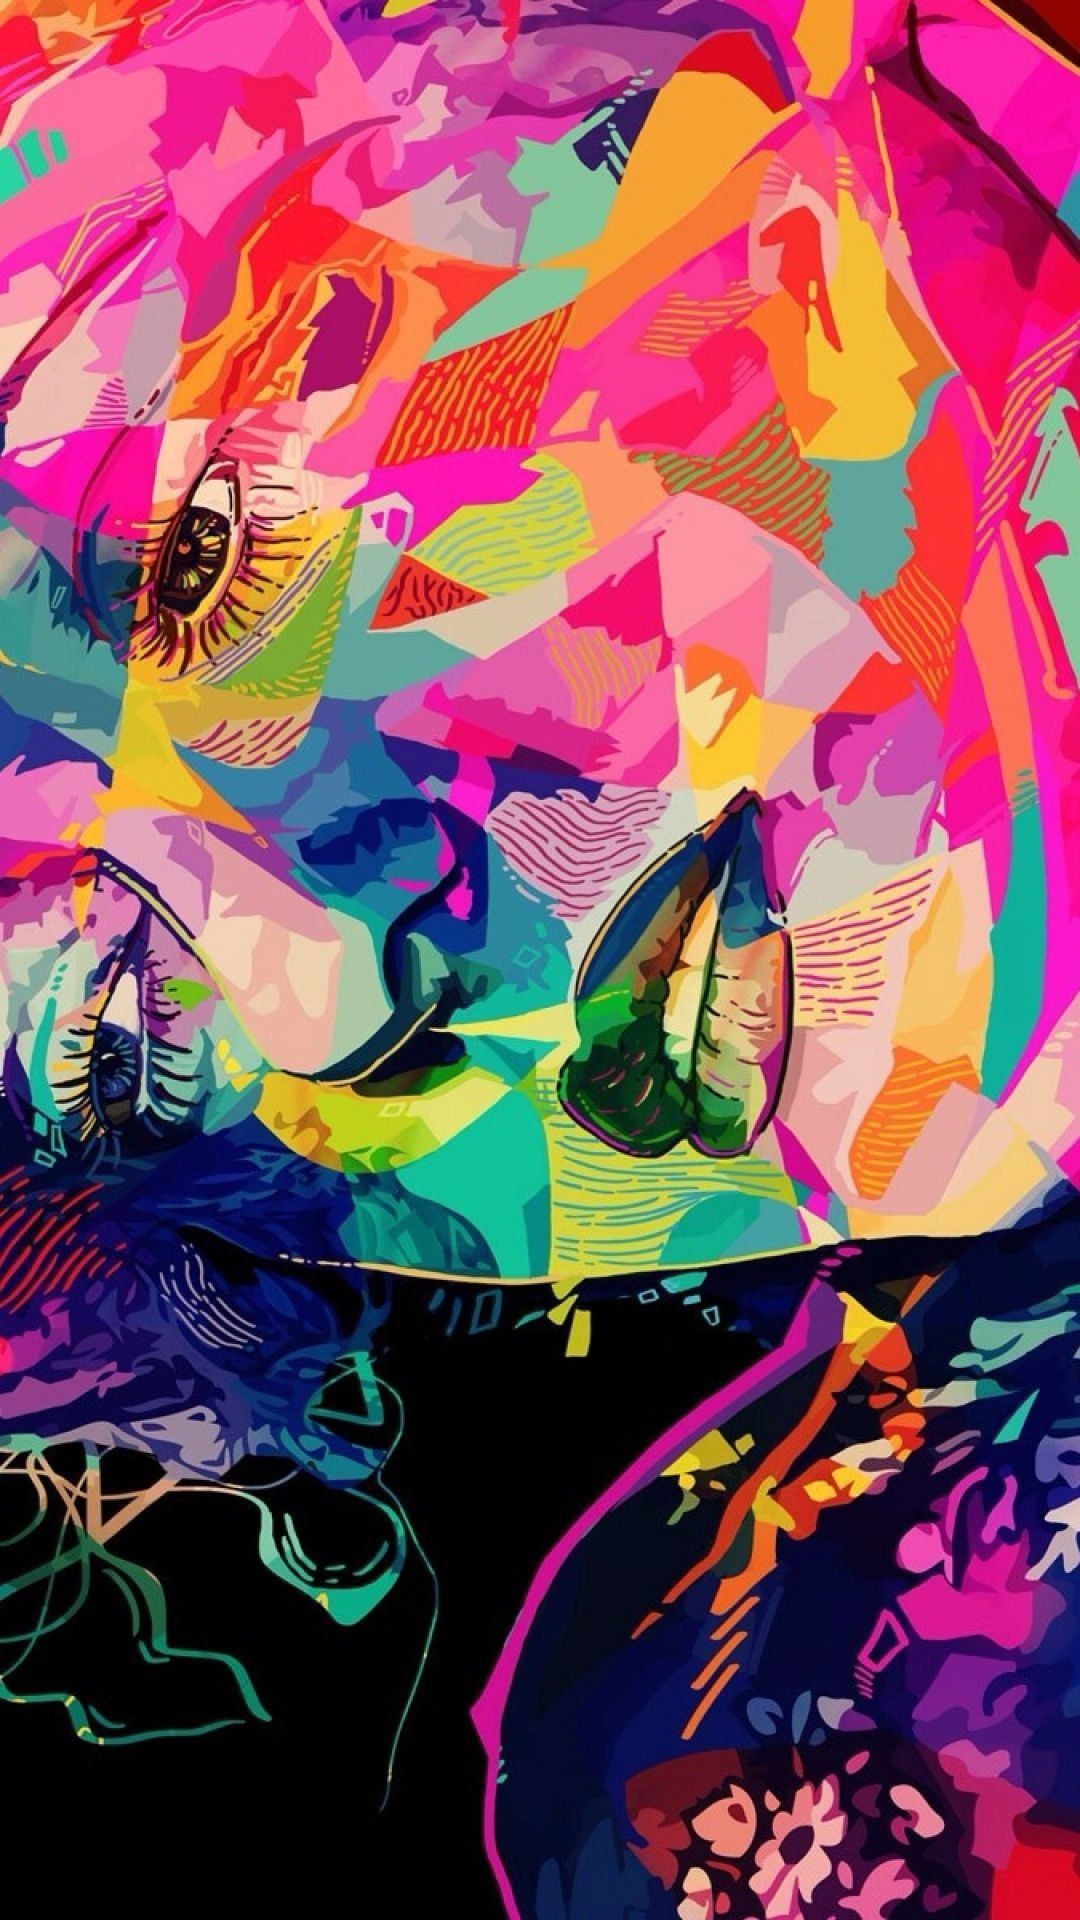 trippy nature iphone wallpaper